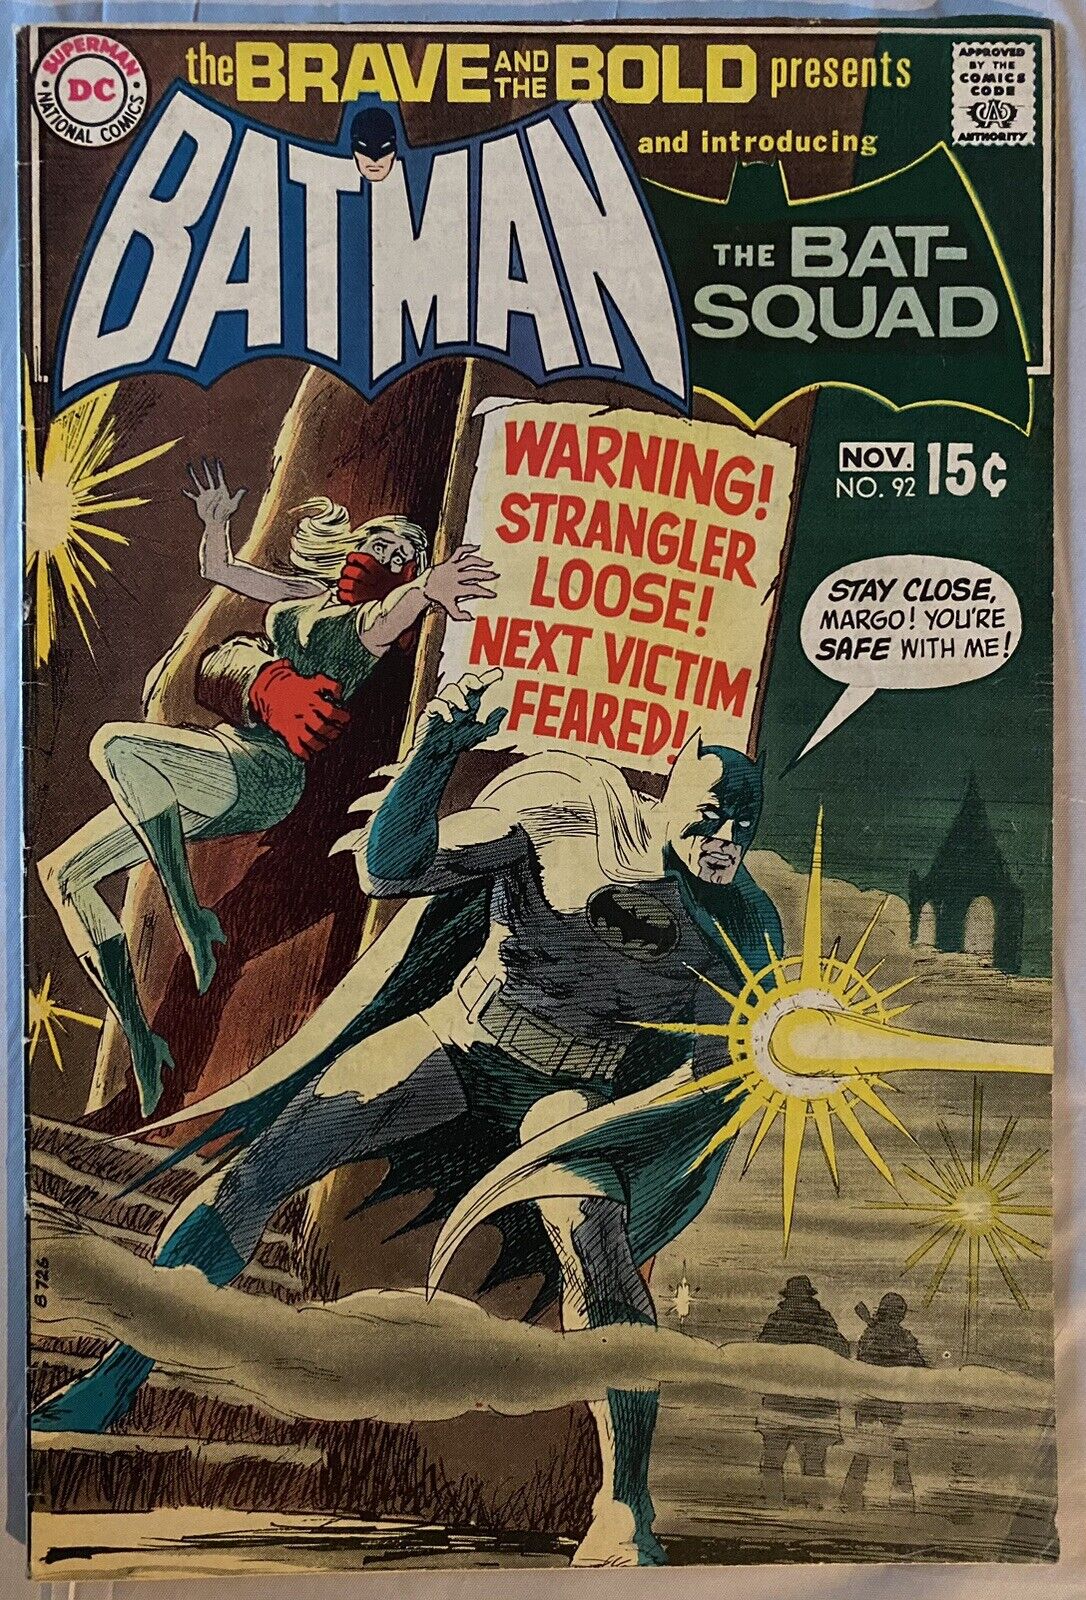 The Brave and the Bold #92 (DC 1970)